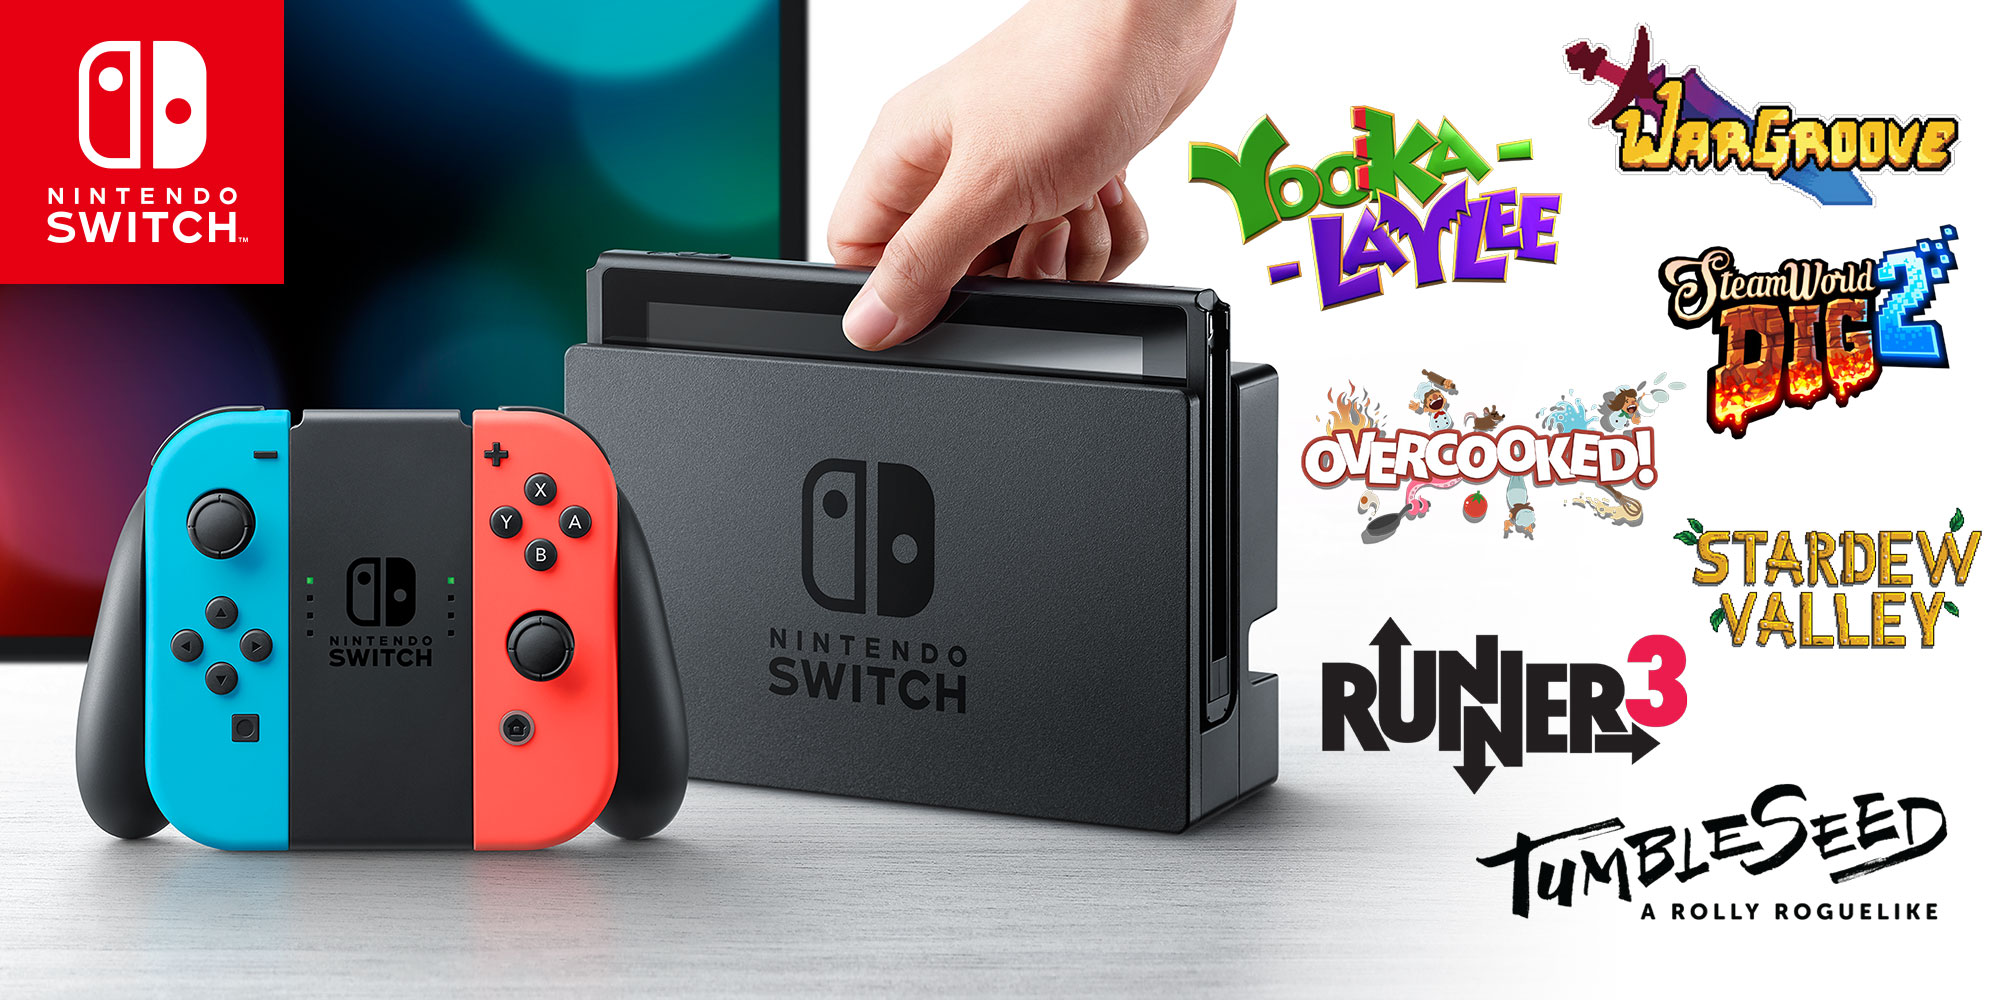 Nintendo reveals new partnerships and first indie games coming to Nintendo eShop on Nintendo Switch